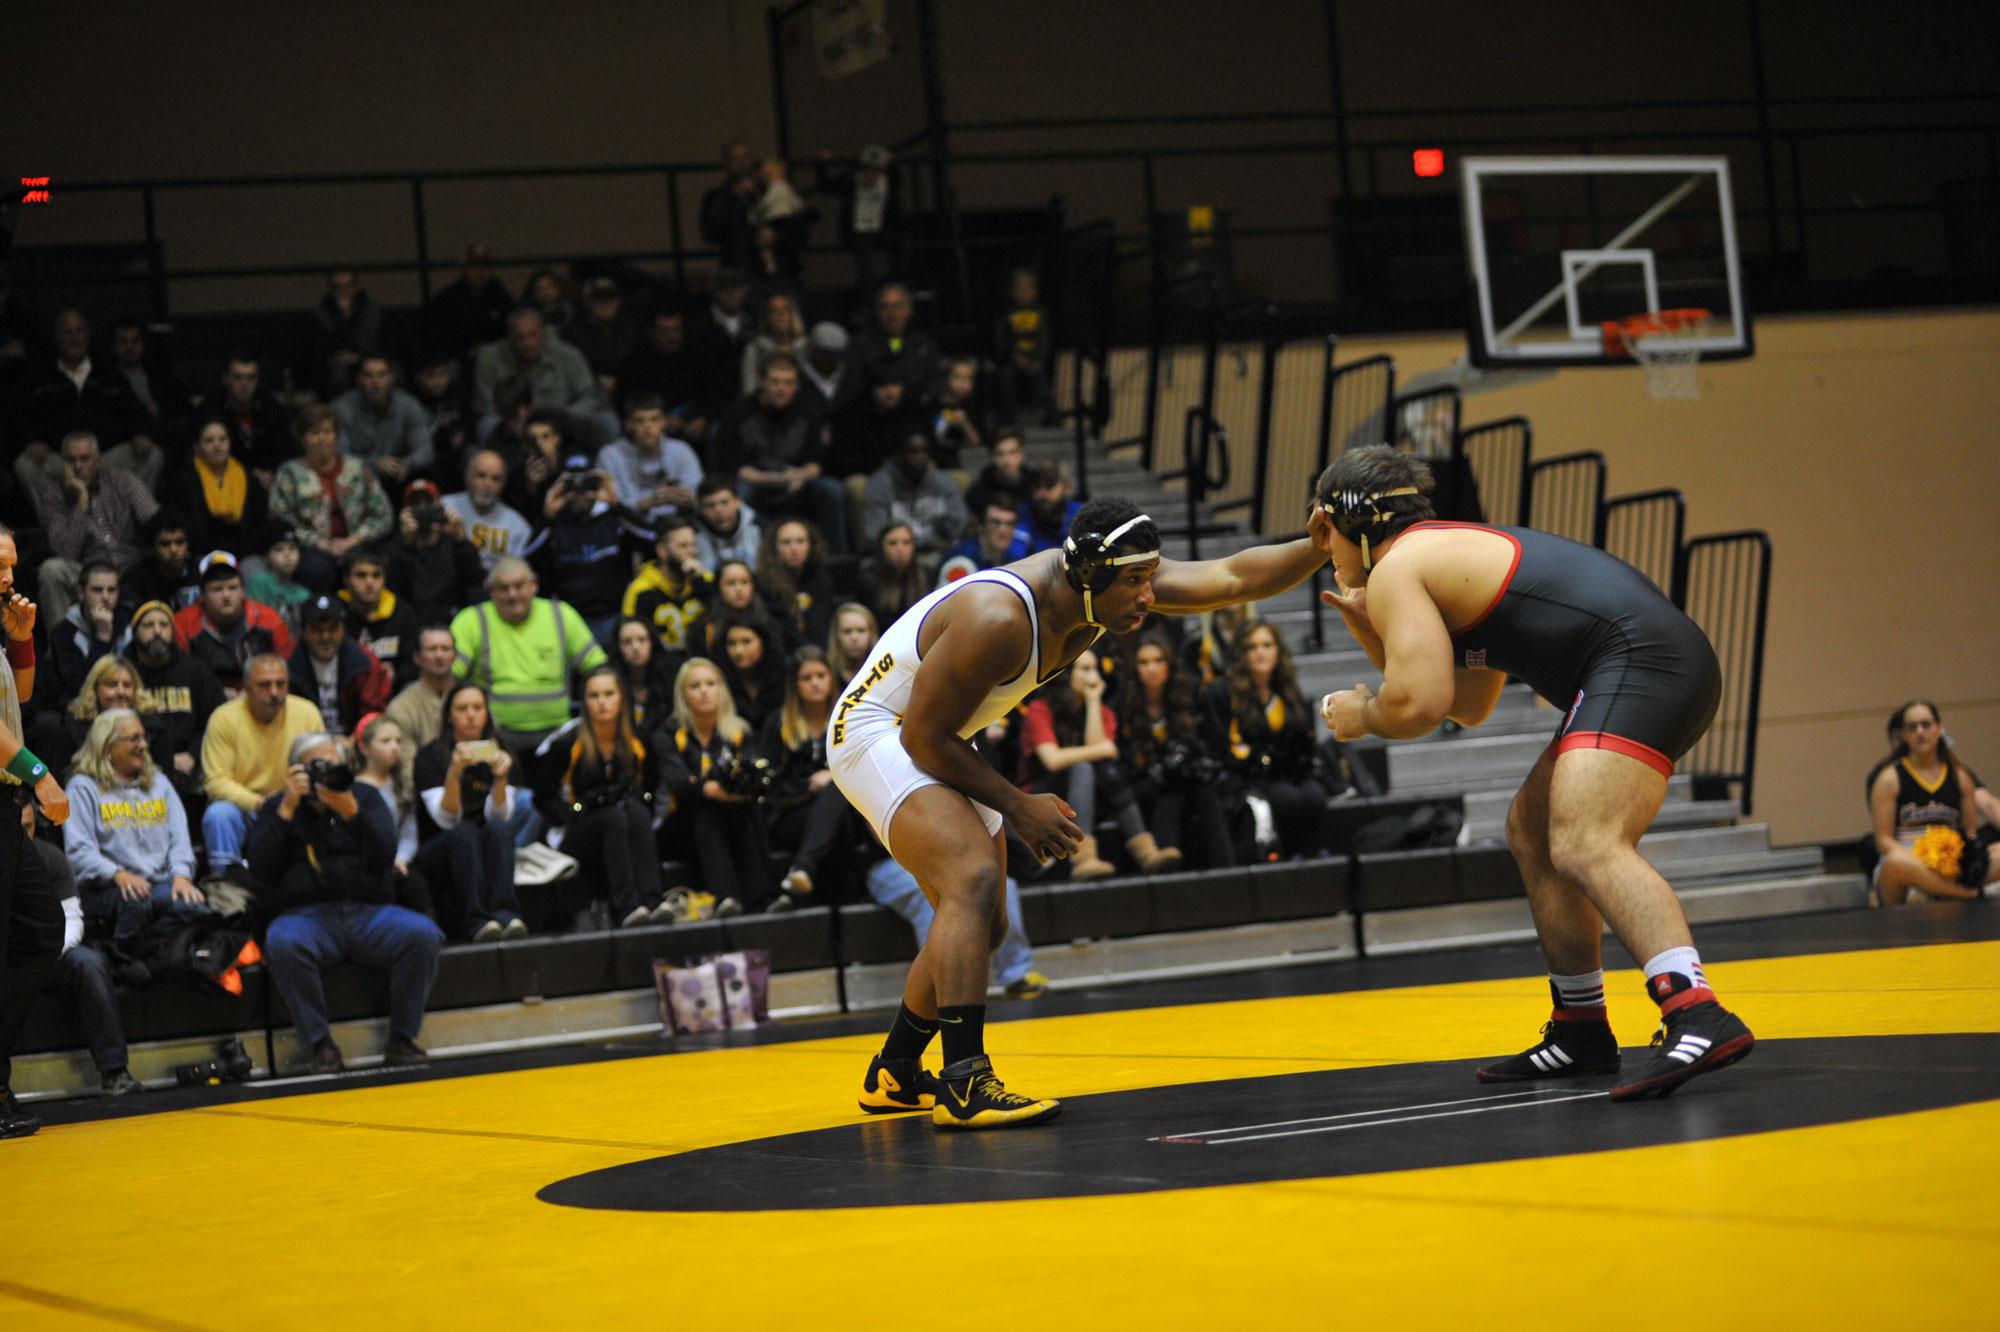 Senior, Denzel Dejournette, faces of with one of his opponents during a wresting match last season in 2015.